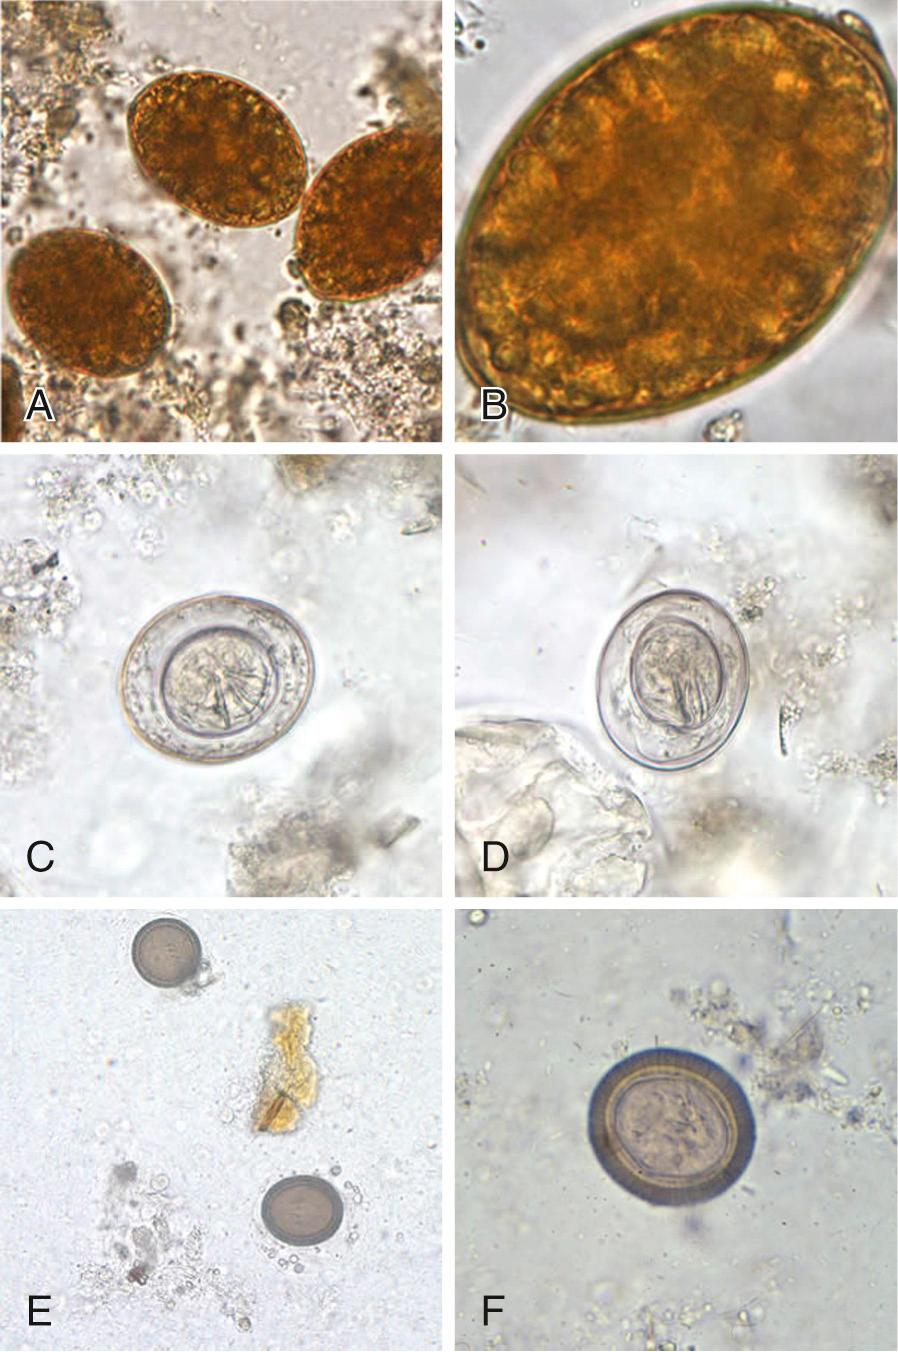 FIG. 289.3, (A–B) Eggs of Diphyllobothrium latum (55–75 µm × 40–50 µm) in an iodine-stained wet mount. Note the knob at the abopercular end in (B). (C–D) Eggs of Hymenolepis nana (30–50 µm) in an unstained wet mount. Note the presence of hooks in the oncosphere and polar filaments within the space between the oncosphere and outer shell. (E–F) Taenia spp. eggs (30–35 µm) in unstained wet mounts. The eggs of T. solium and T. saginata are indistinguishable from each other as well as from other members of the Taeniidae family.